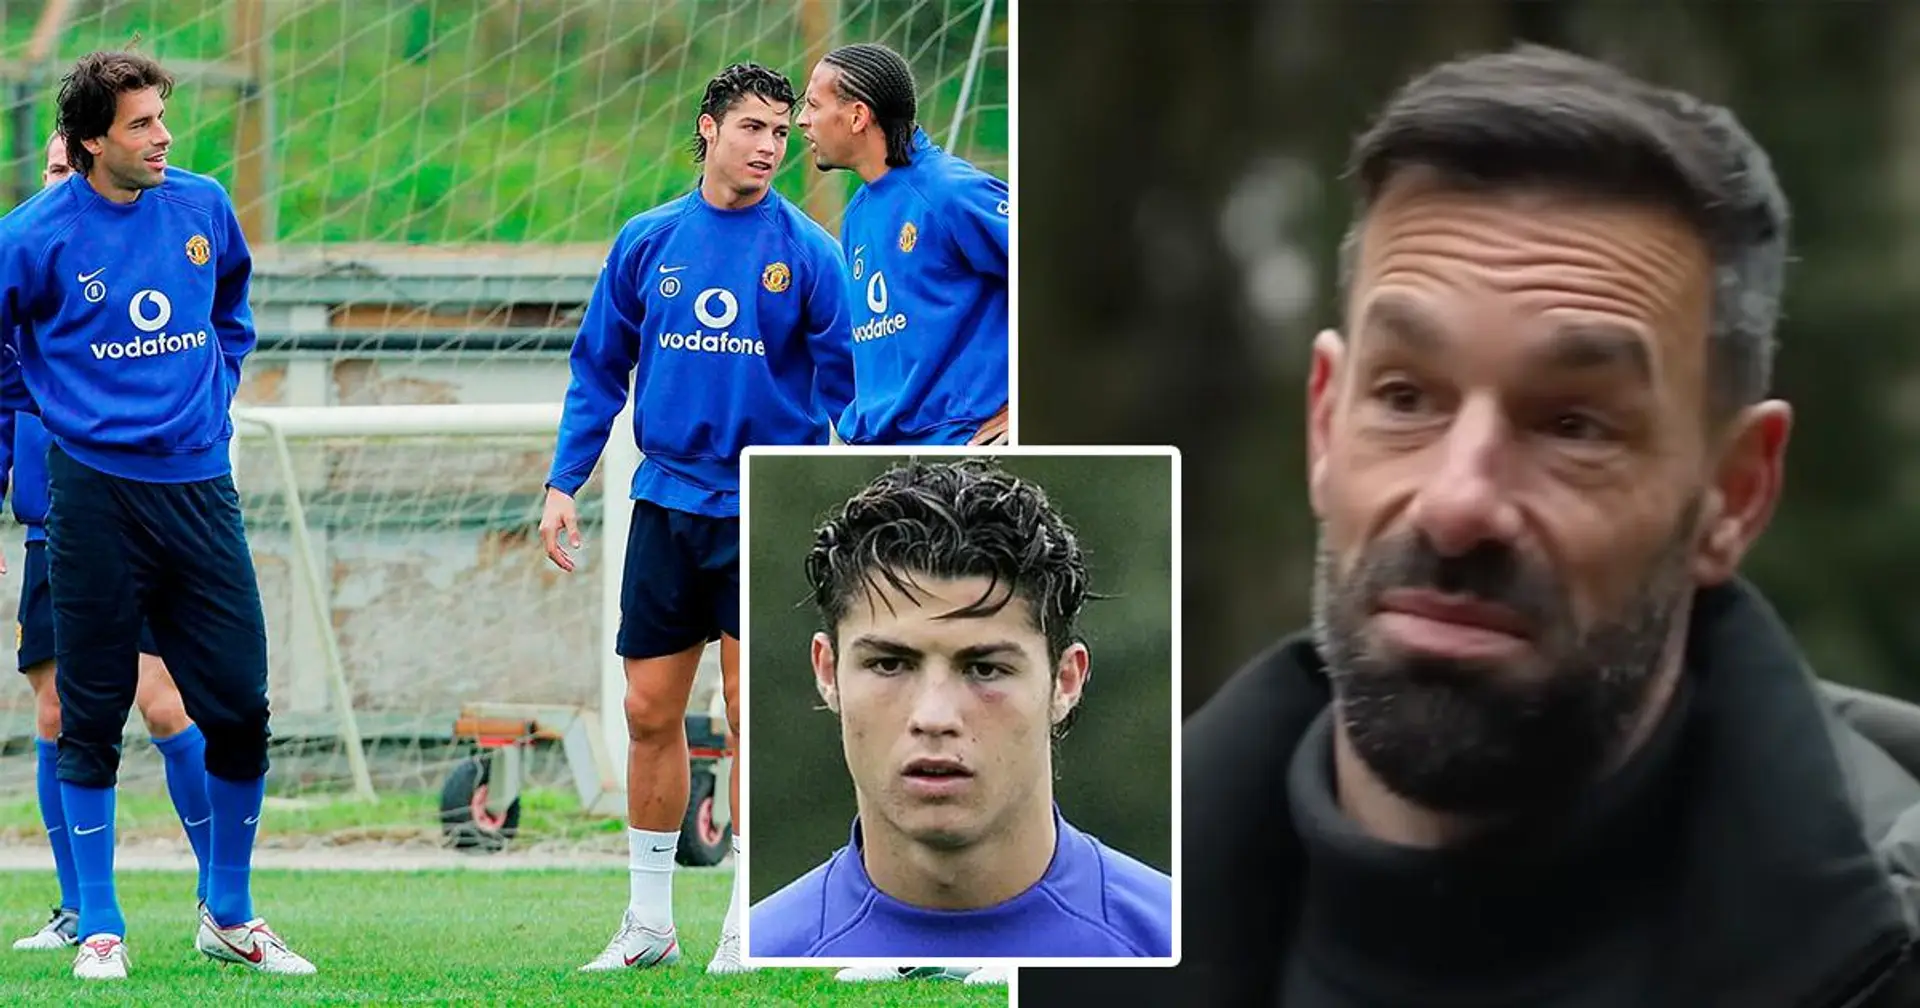 'I was wrong in that situation': The day Van Nistelrooy made Cristiano Ronaldo cry in training